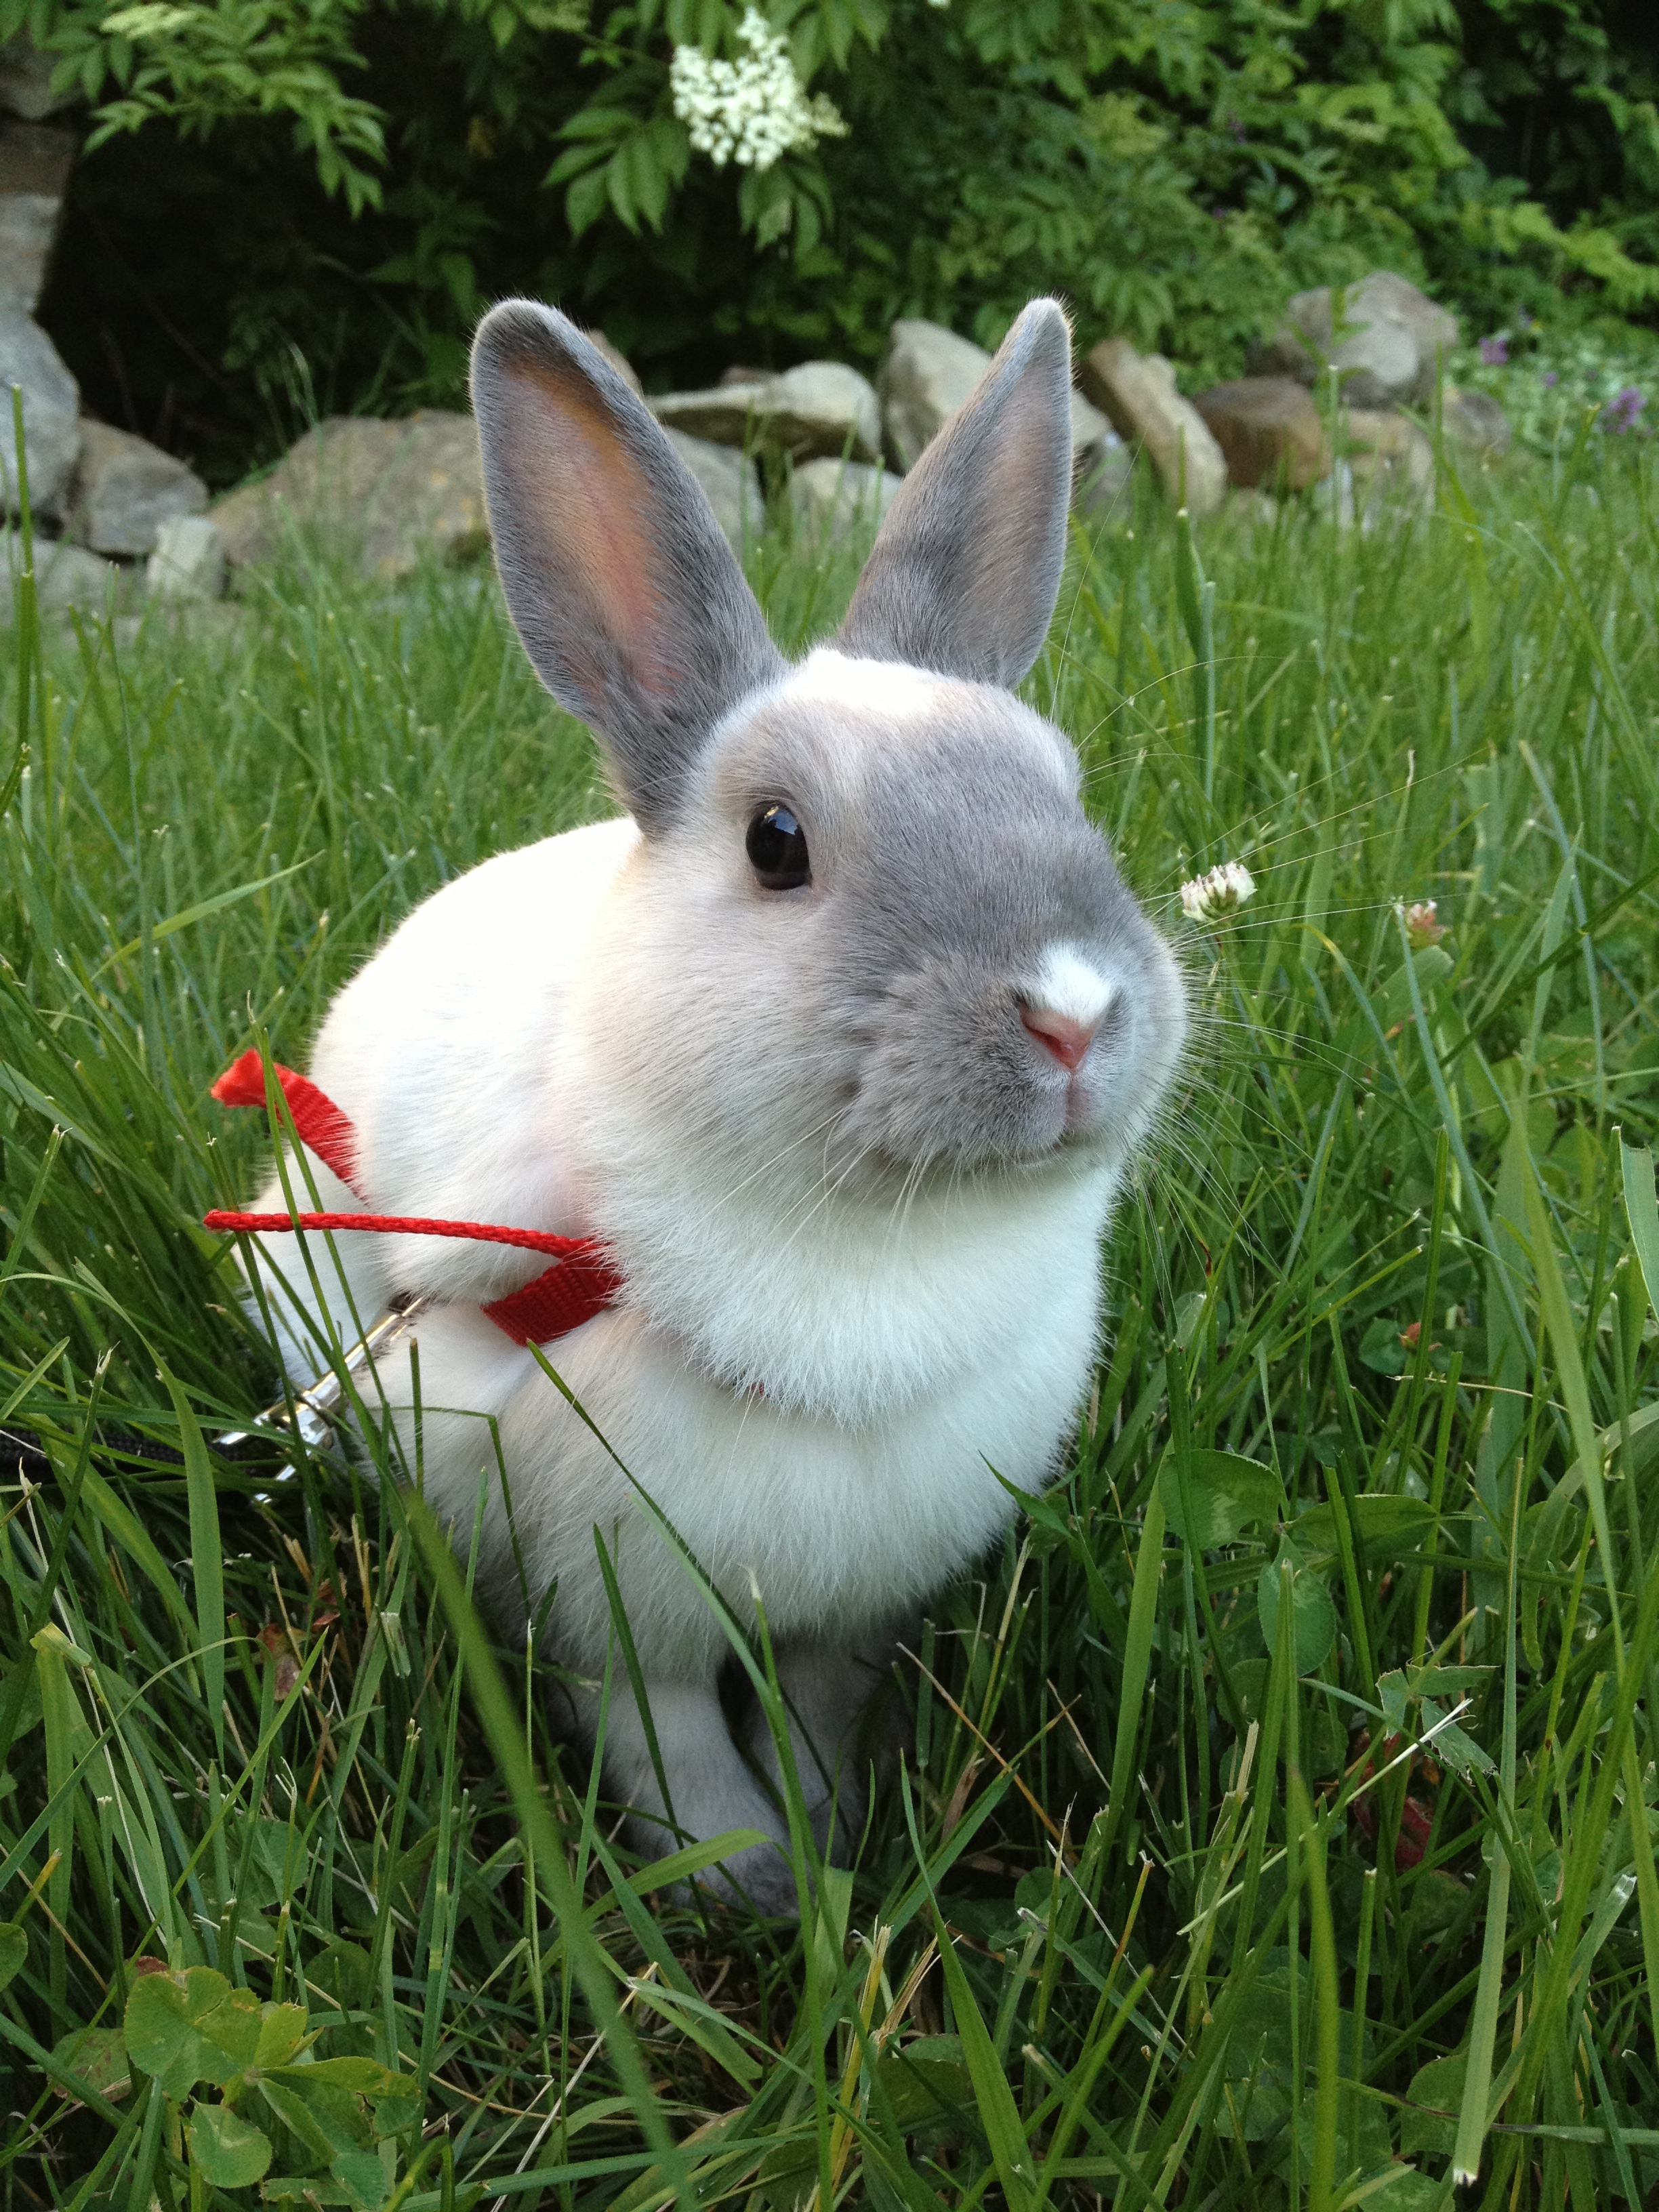 Photos Illustrating Two Sides of Bunny: One in Which He Sits Sweetly, Another in Which Grass Sticks Out of His Mouth While Eating 1